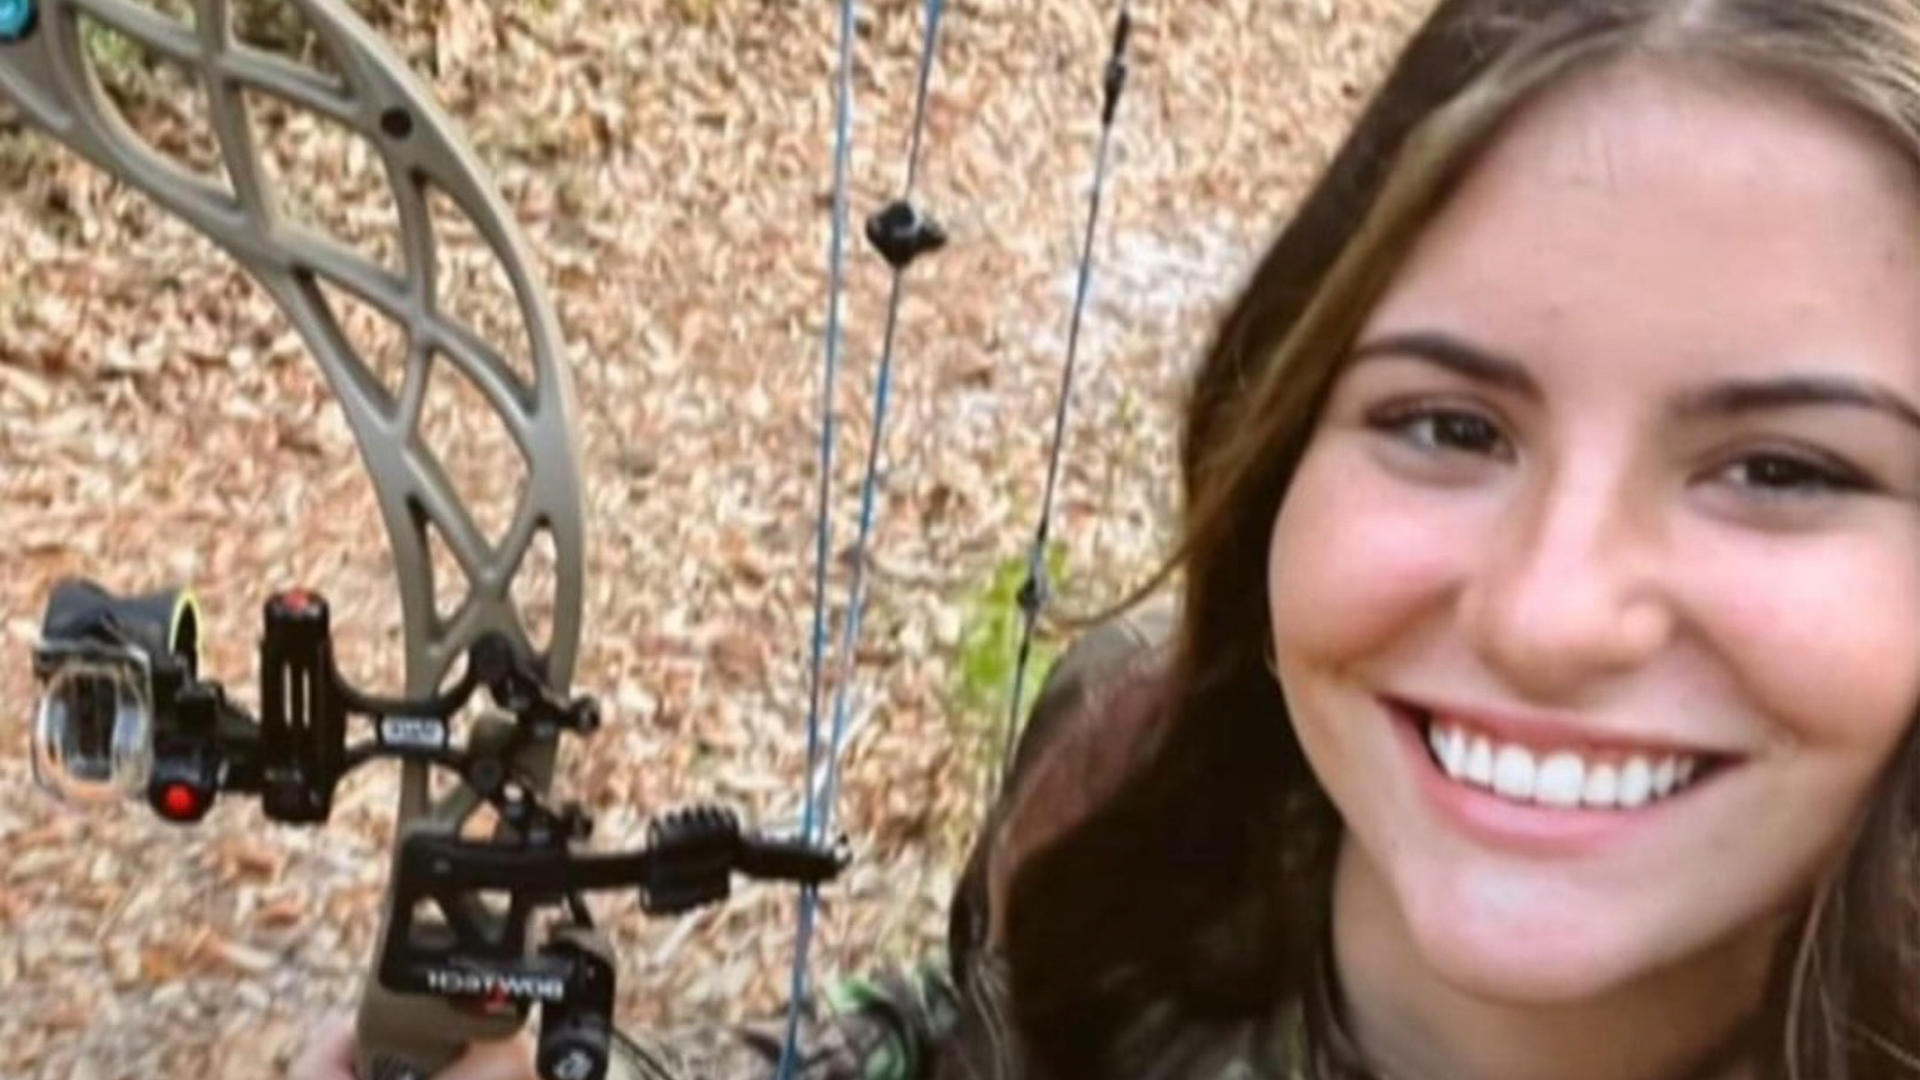 Florida Teen Killed By Lightning While Hunting With Her Dad